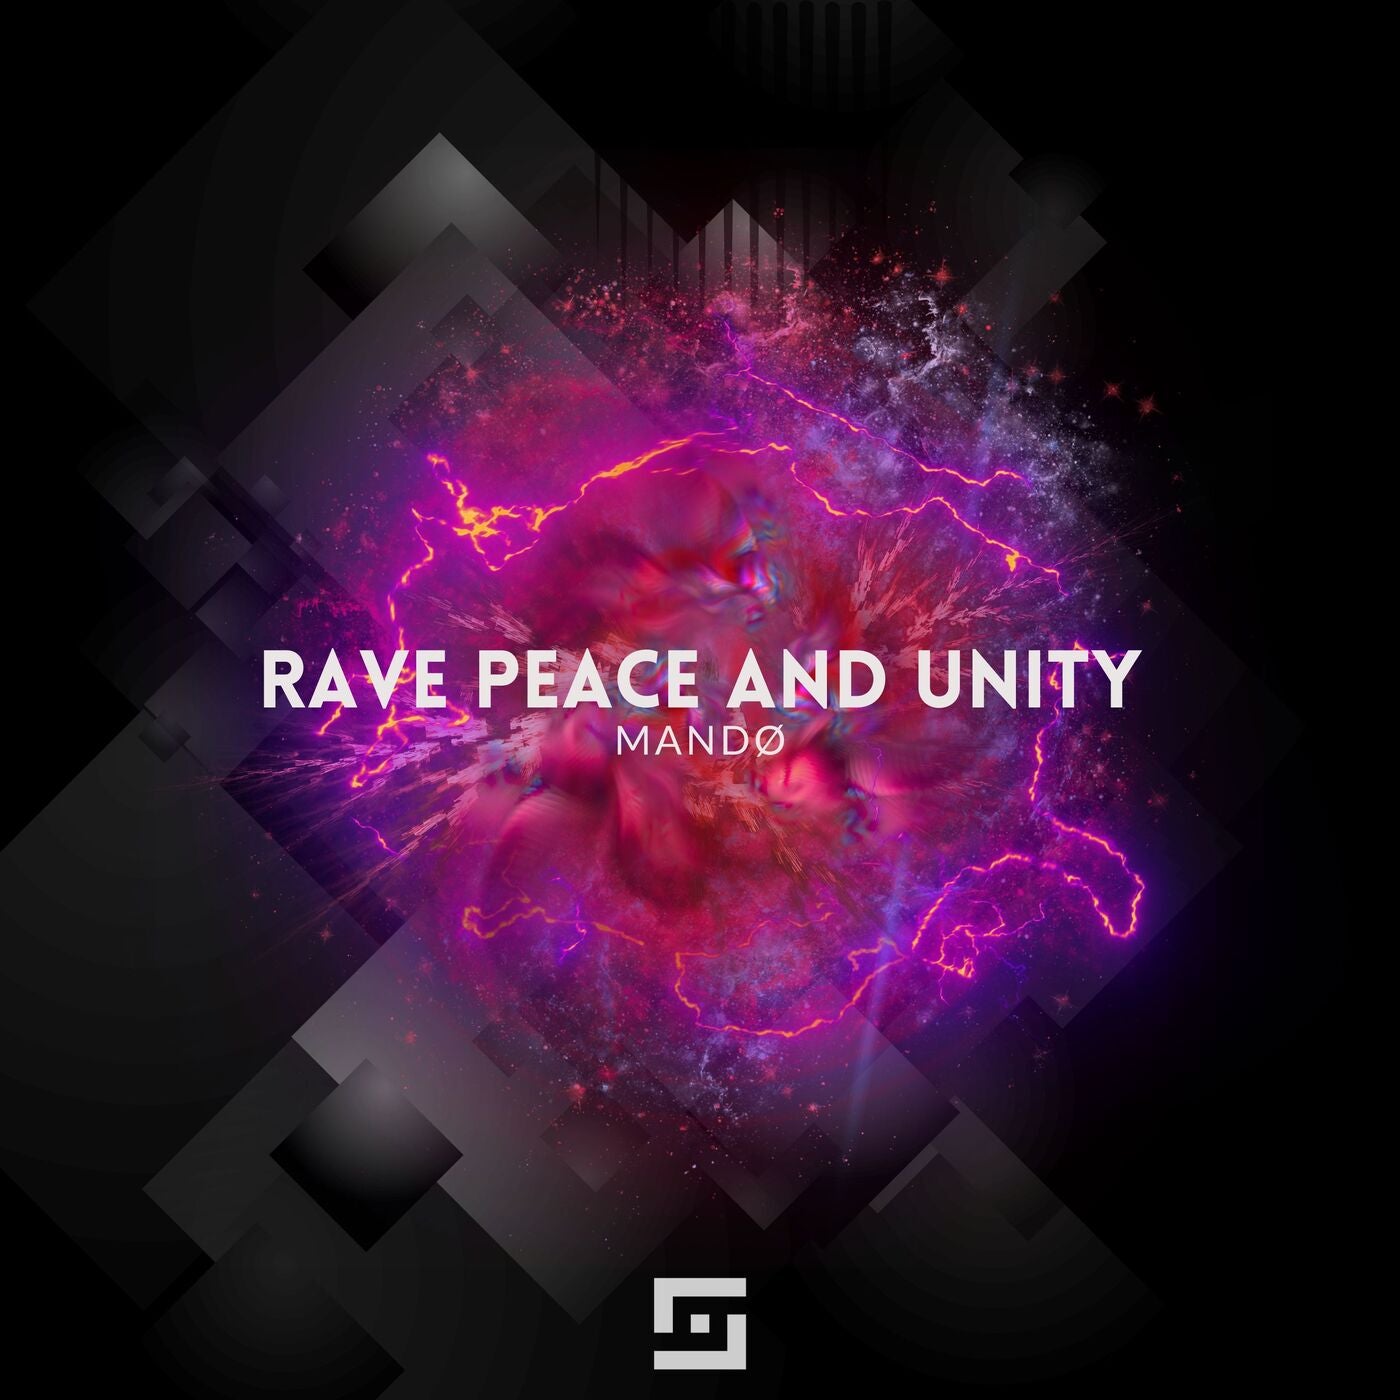 Rave Peace and Unity